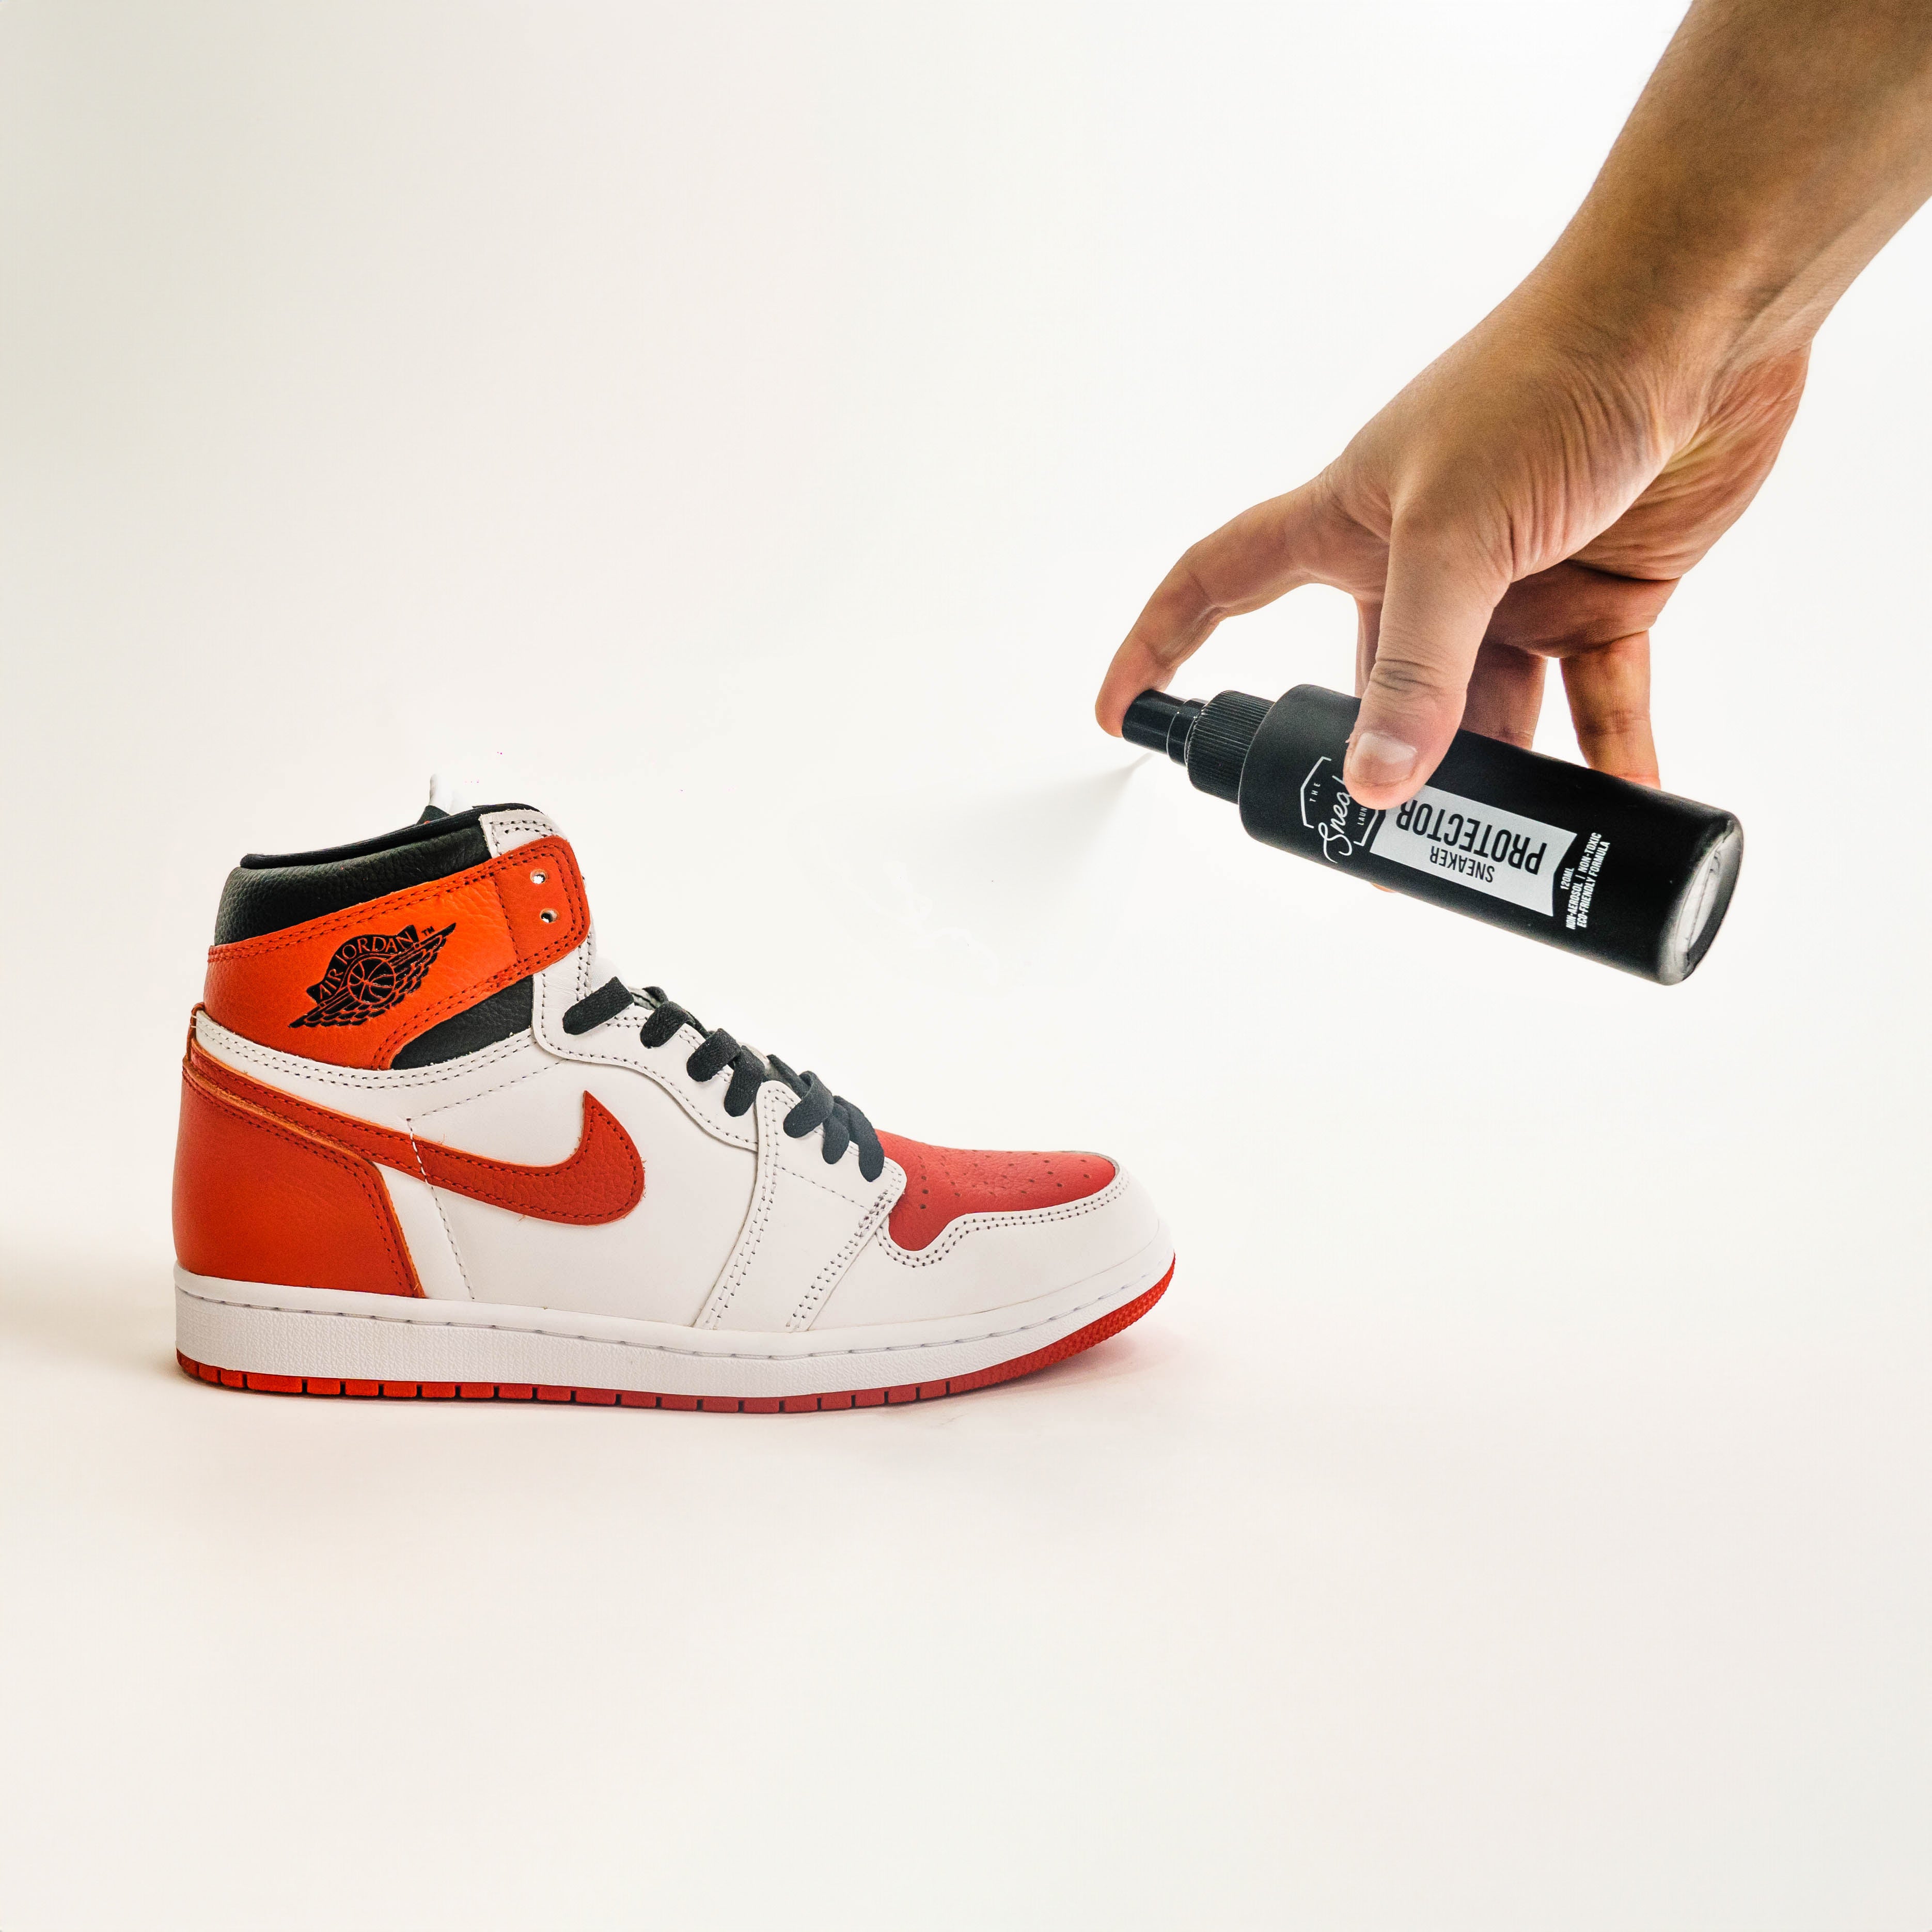 How To Clean Air Jordan 1 Shattered Backboard With Reshoevn8r 